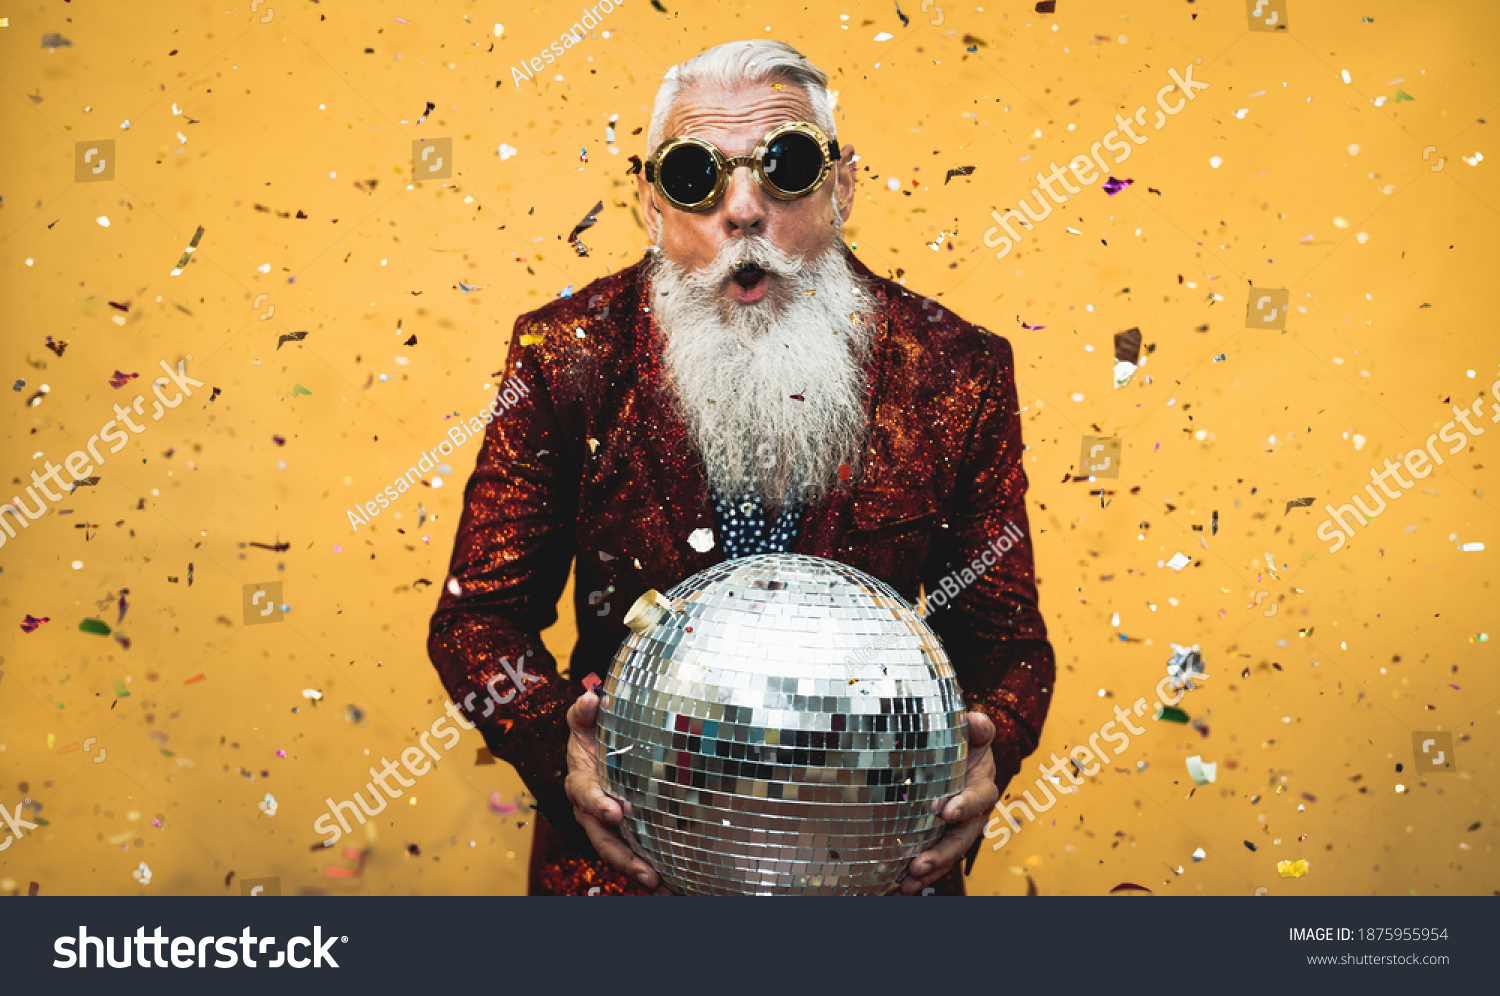 Crazy senior man having fun doing party during holidays time - Elderly people celebrating life concept  #1875955954